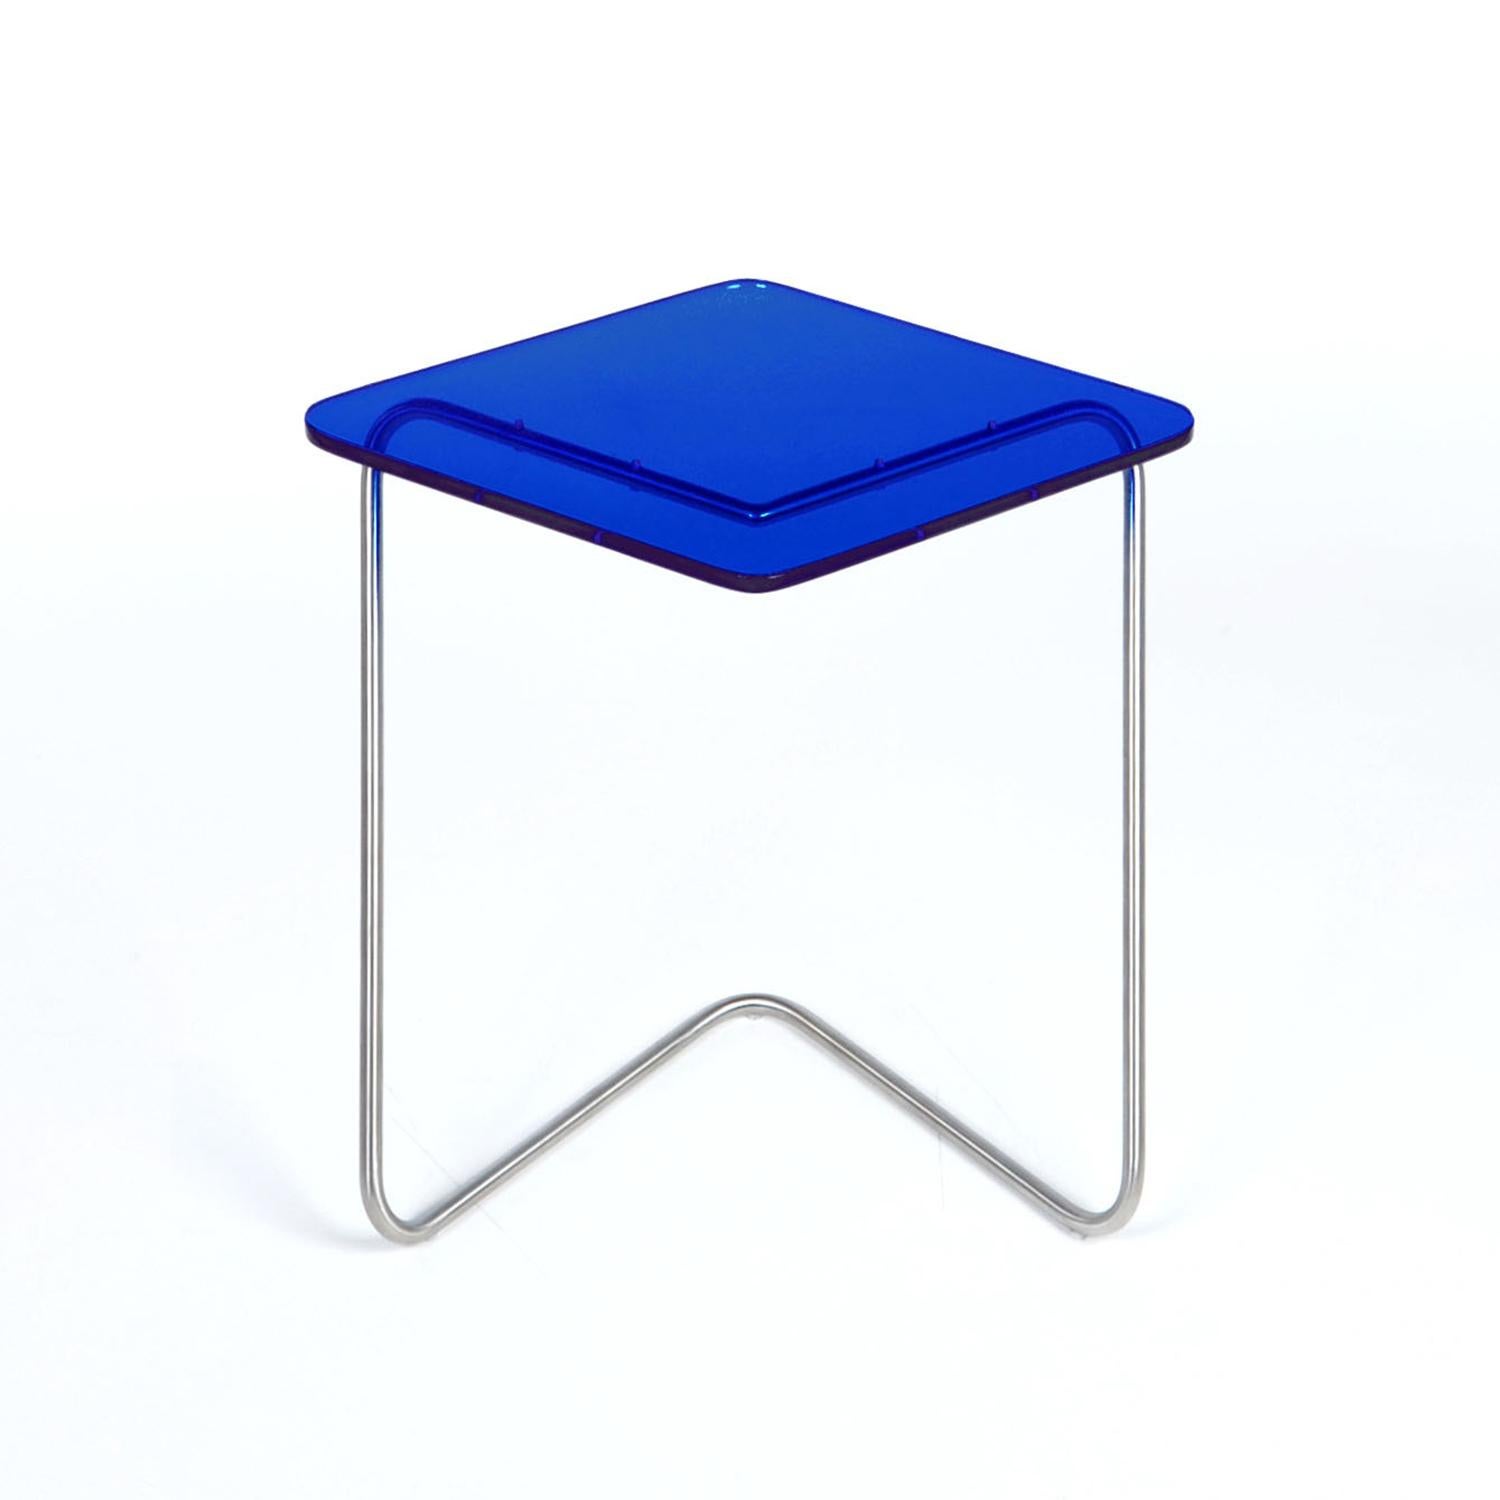 The Diamond side table by Rita Kettaneh 
Dimensions: The base: brushed stainless steel 
 optionally plated with copper or brass
 The top: acrylic
Materials: H 42 x W 45 x D 34.5 cm
Weight: 2.65 Kg

Colors and Finishes: 
Stainless finish: